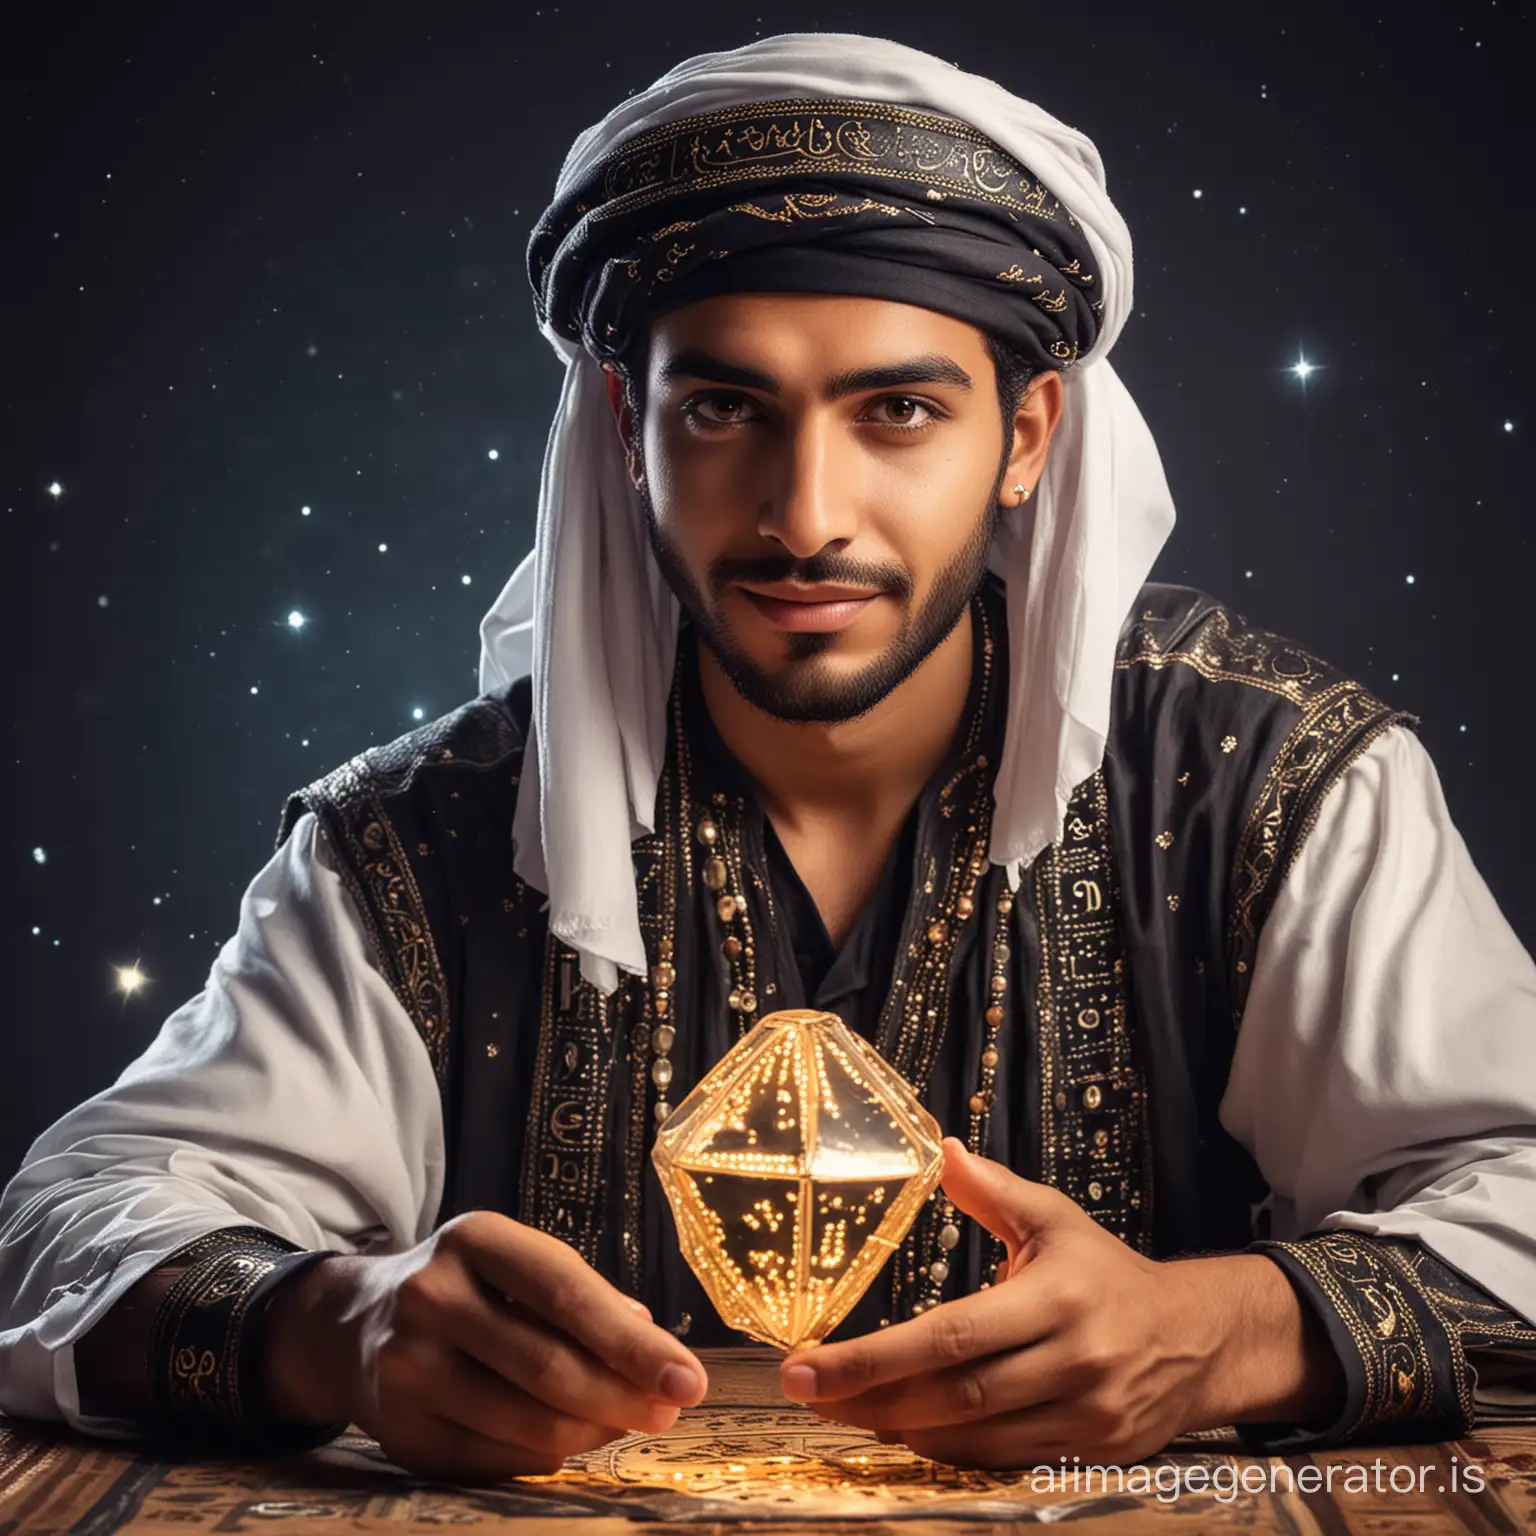 Handsome-Arab-Man-with-12-Zodiac-Signs-in-the-Astrological-Universe